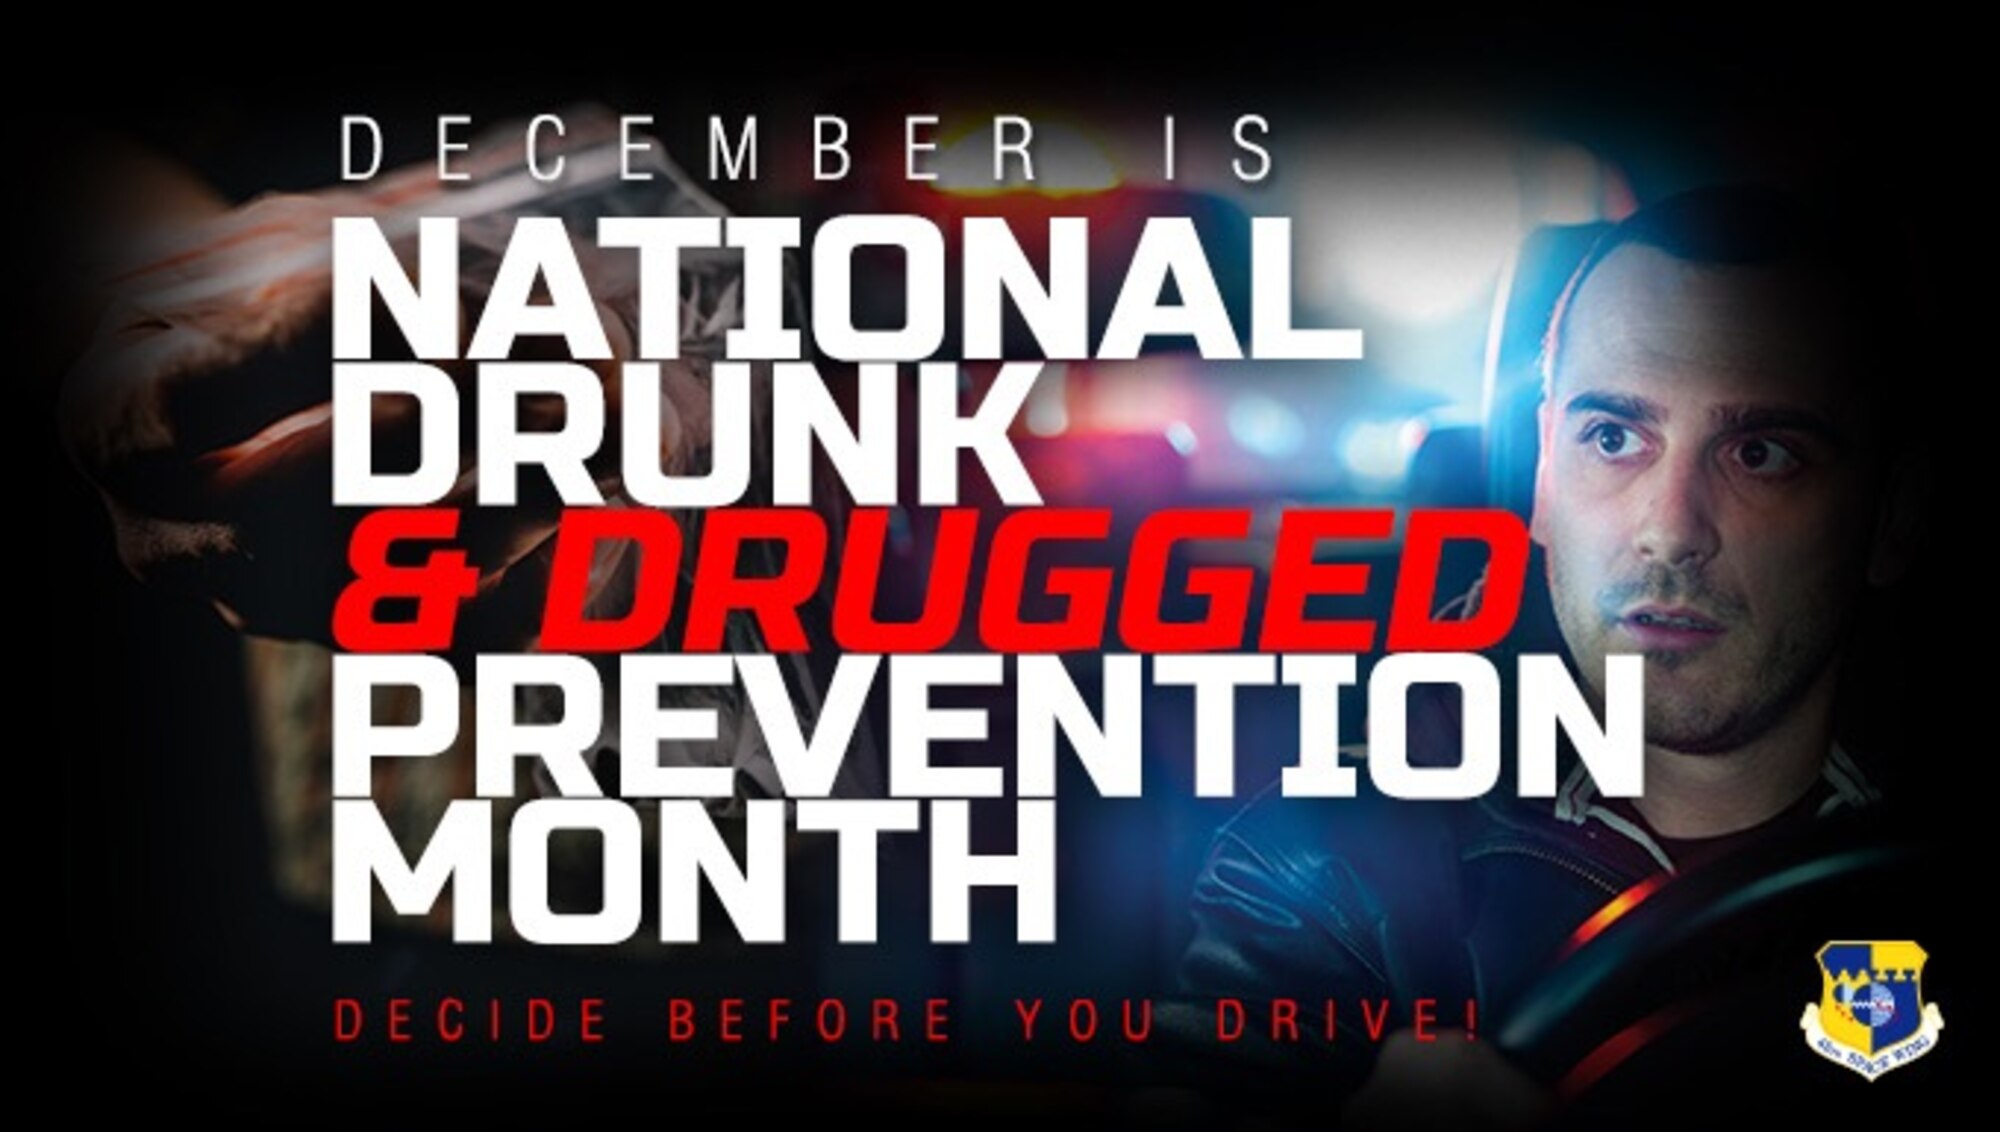 Drunk and drugged driving is a deadly epidemic, yet it still continues across the United States. In addition to the human toll, drunk driving takes a toll on our country. The financial impact is devastating, based on 2010 numbers, the most recent year for which cost data is available, impaired driving crashes cost the United States $44 billion annually, according to the CDC. (Courtesy illustration)